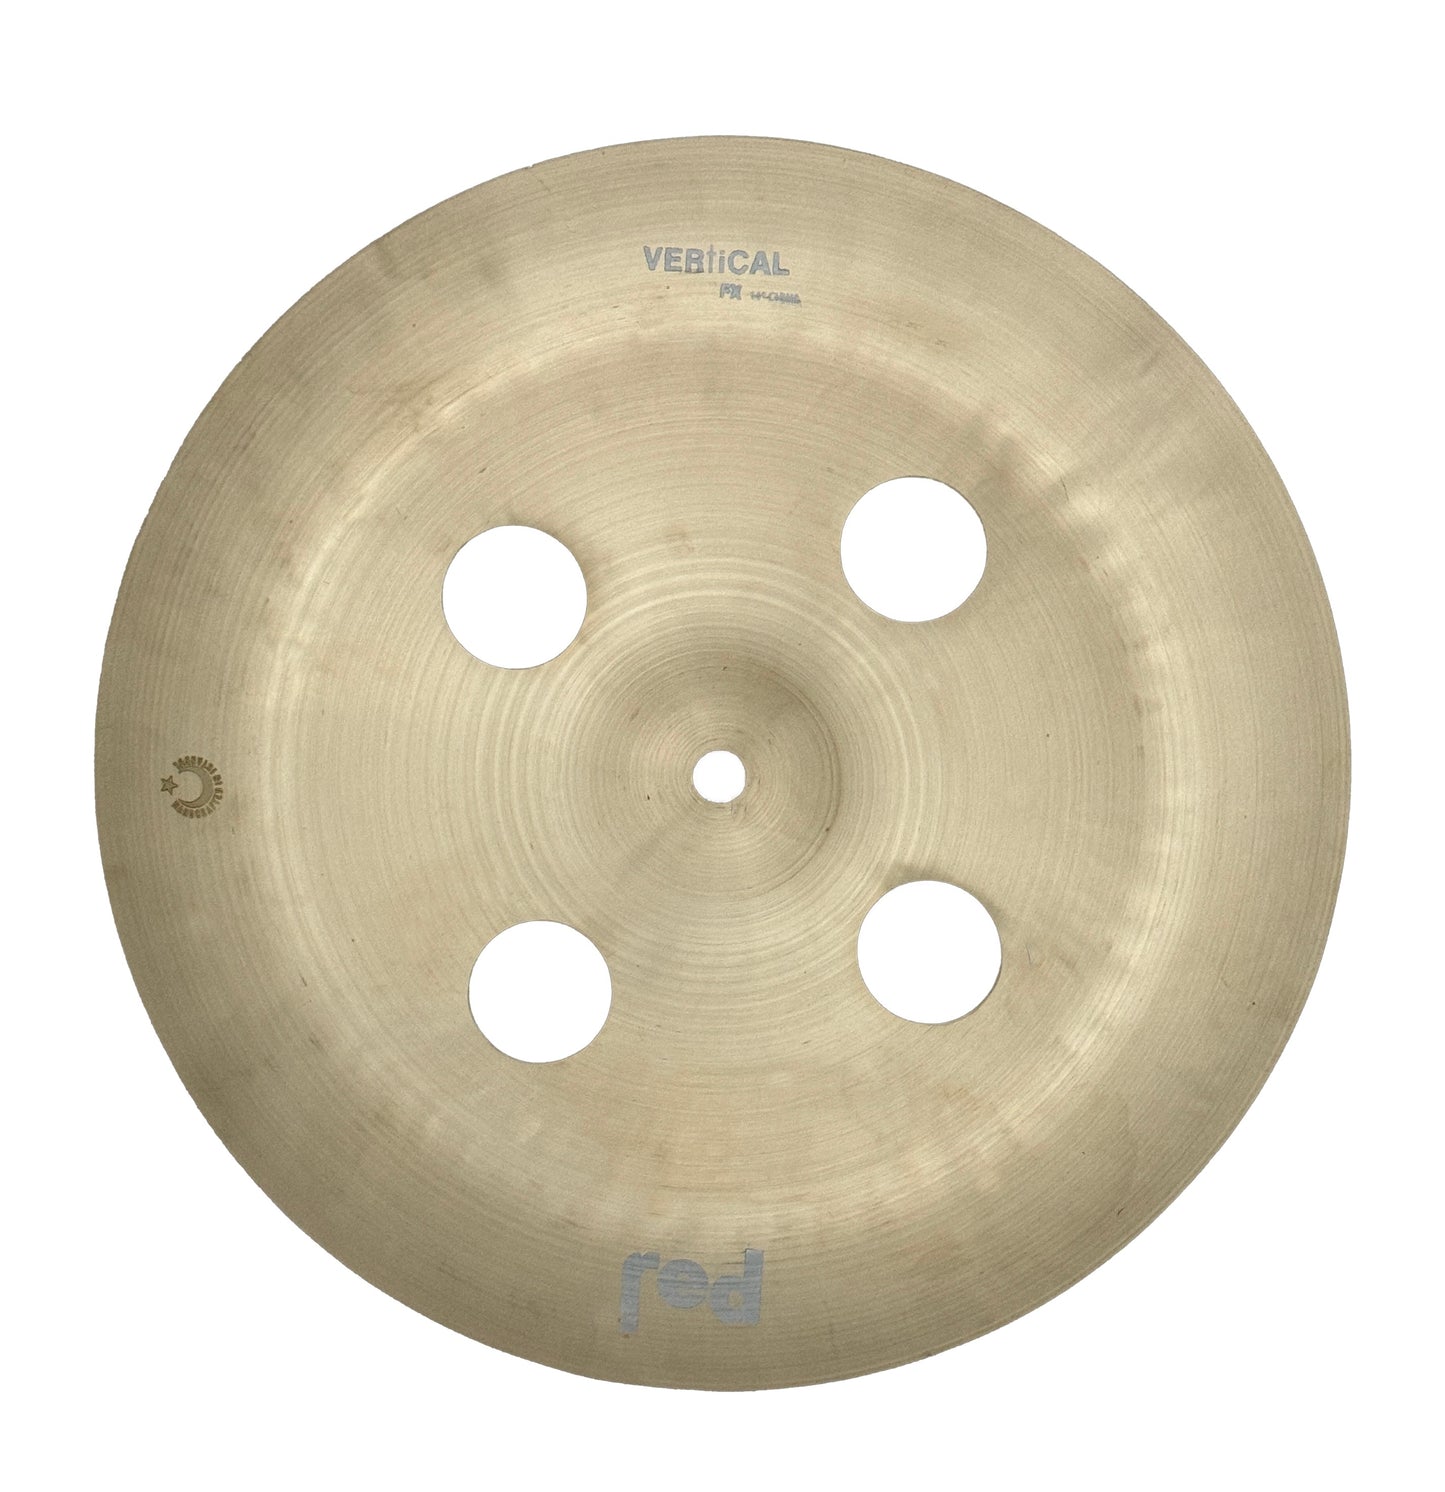 Vertical Series fx China Cymbal